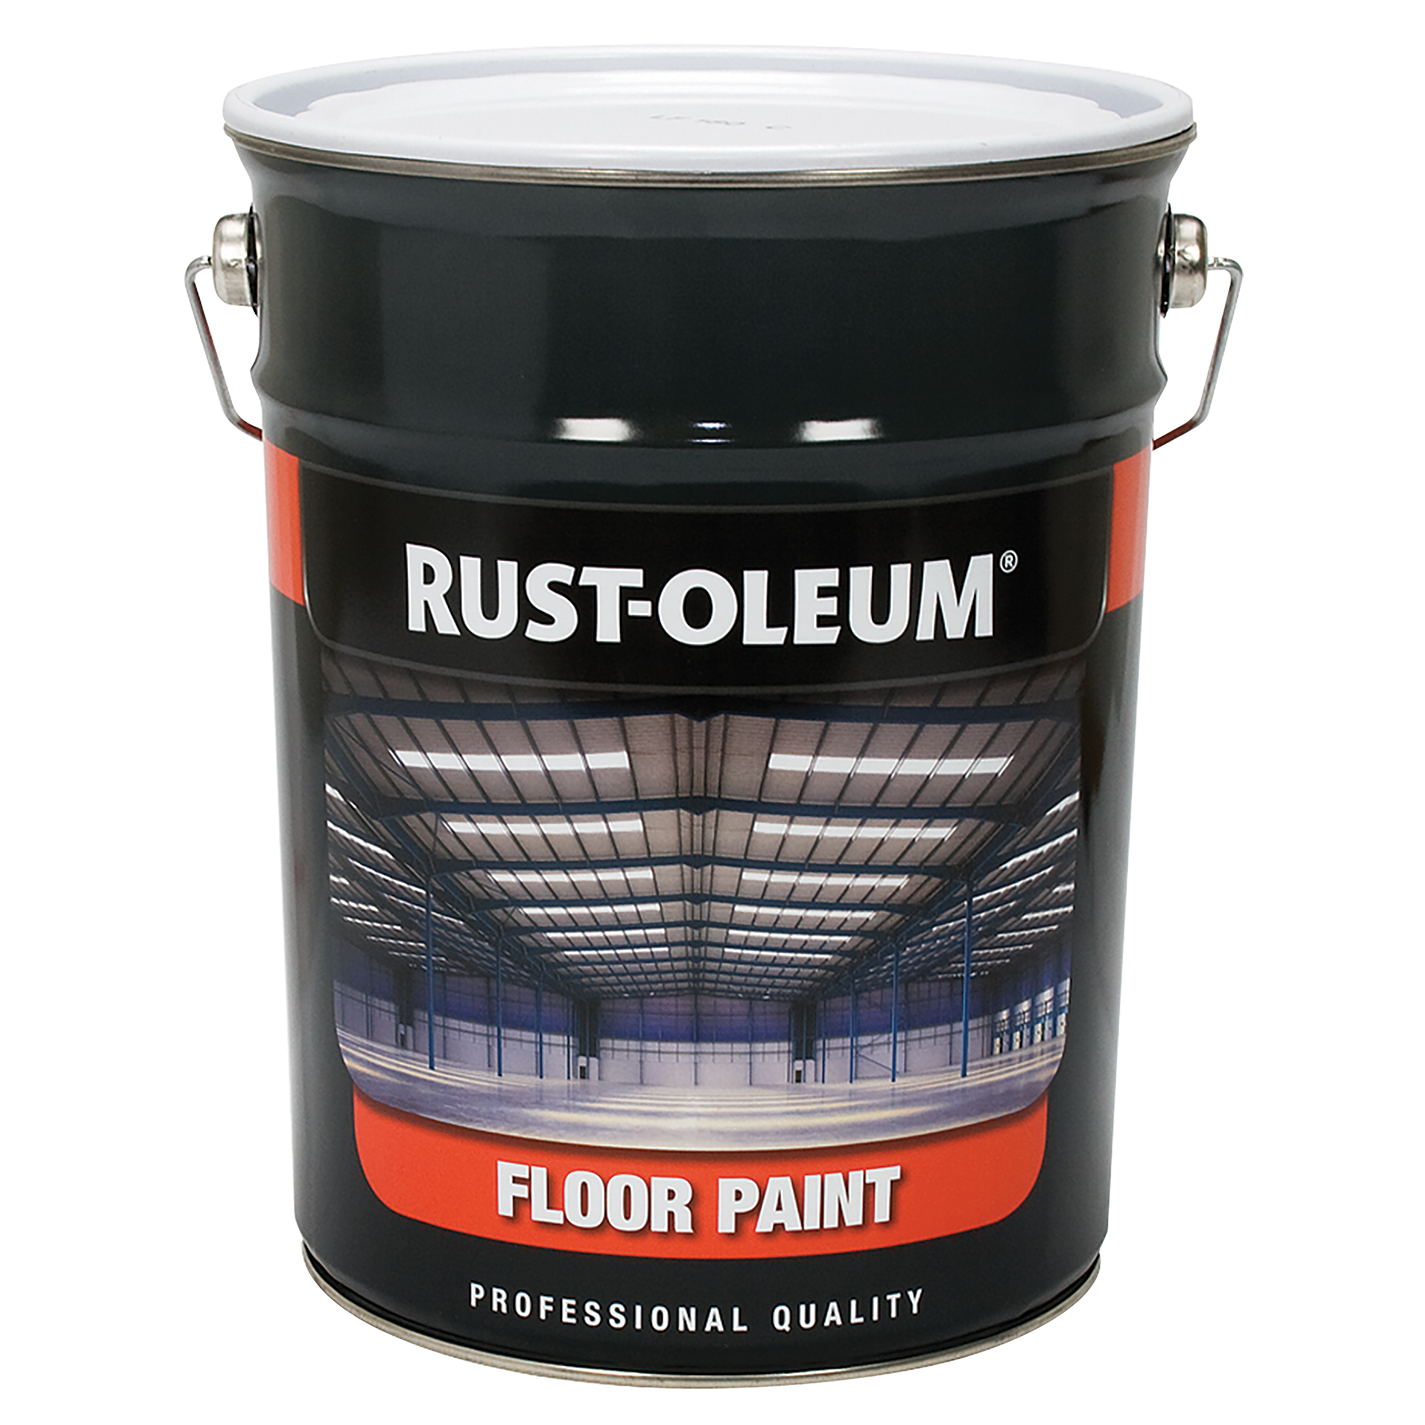 SAFETY YELLOW FLOOR PAINT 5 LTR